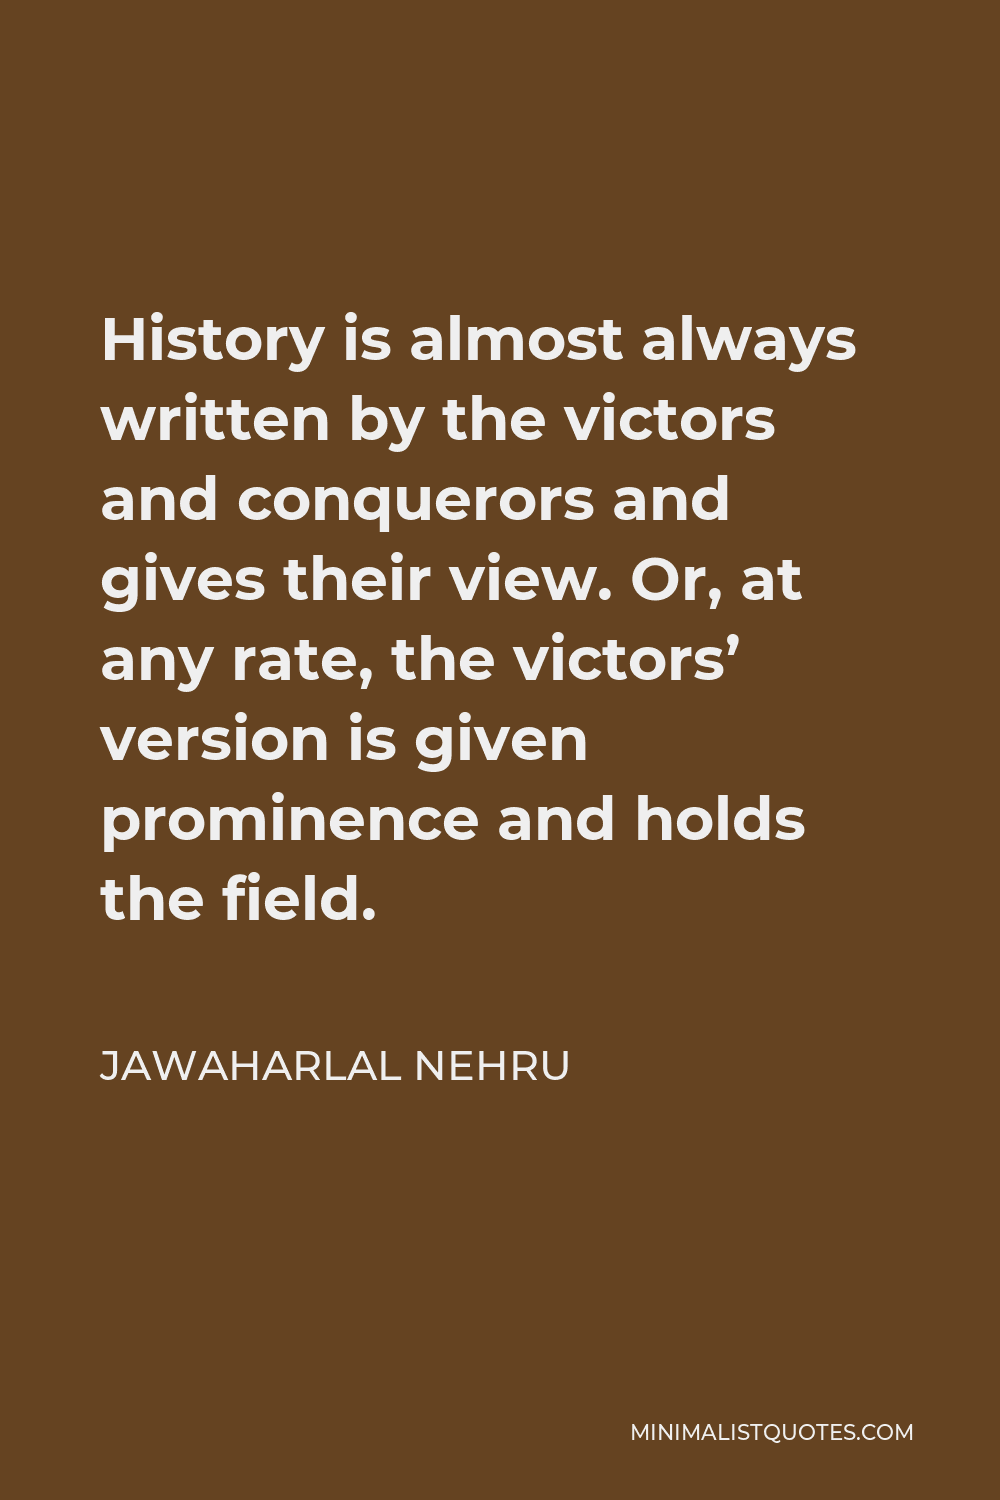 Jawaharlal Nehru Quote - History is almost always written by the victors and conquerors and gives their view. Or, at any rate, the victors’ version is given prominence and holds the field.